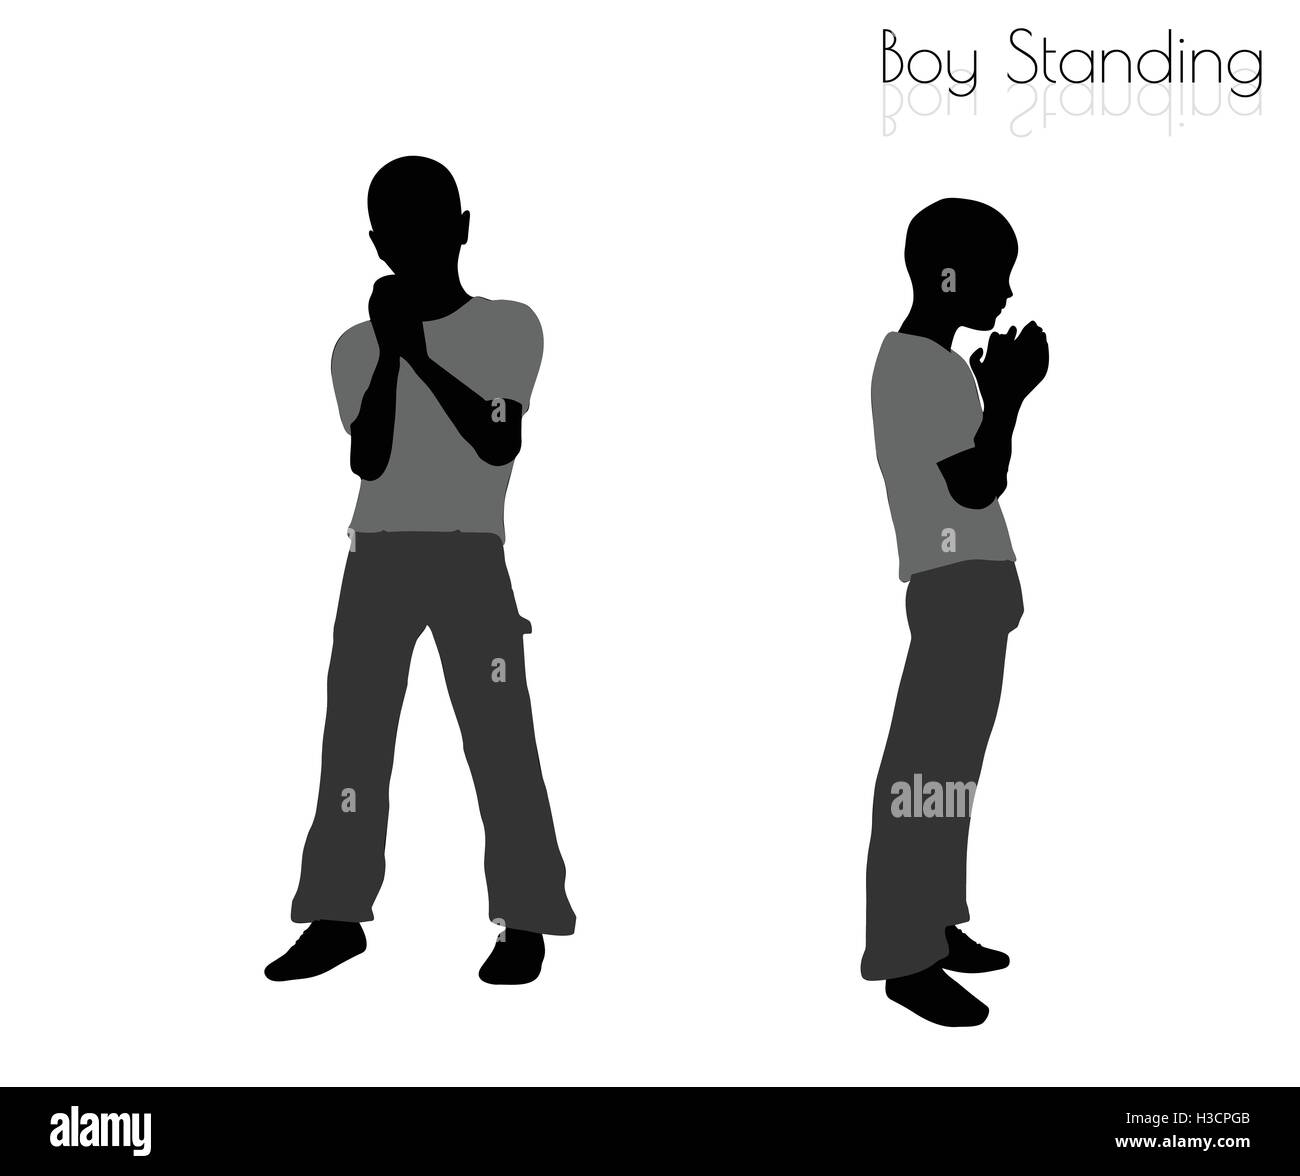 EPS 10 vector illustration of boy in Standing pose on white background Stock Vector